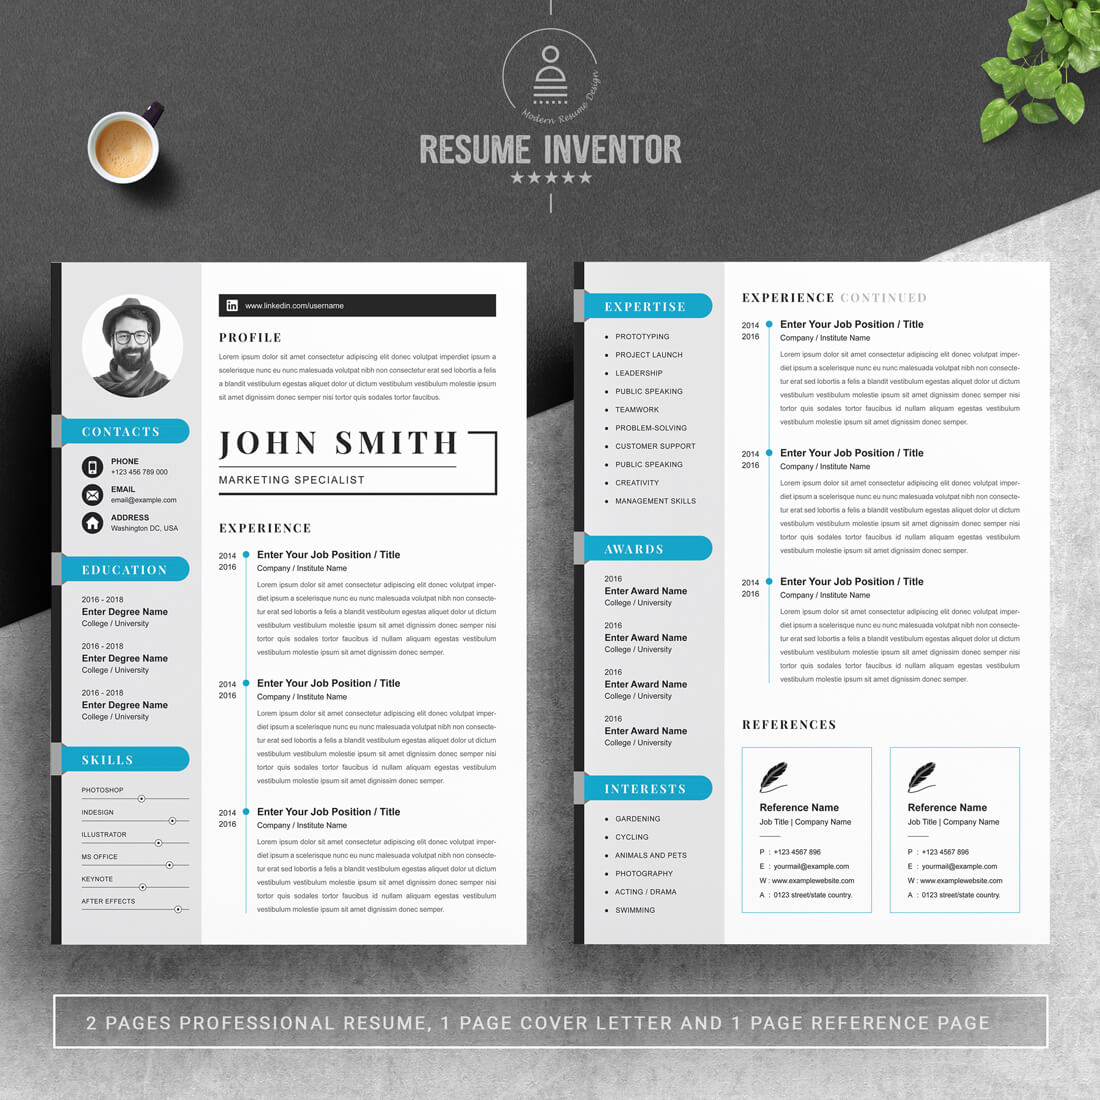 Professional resume template with blue accents.